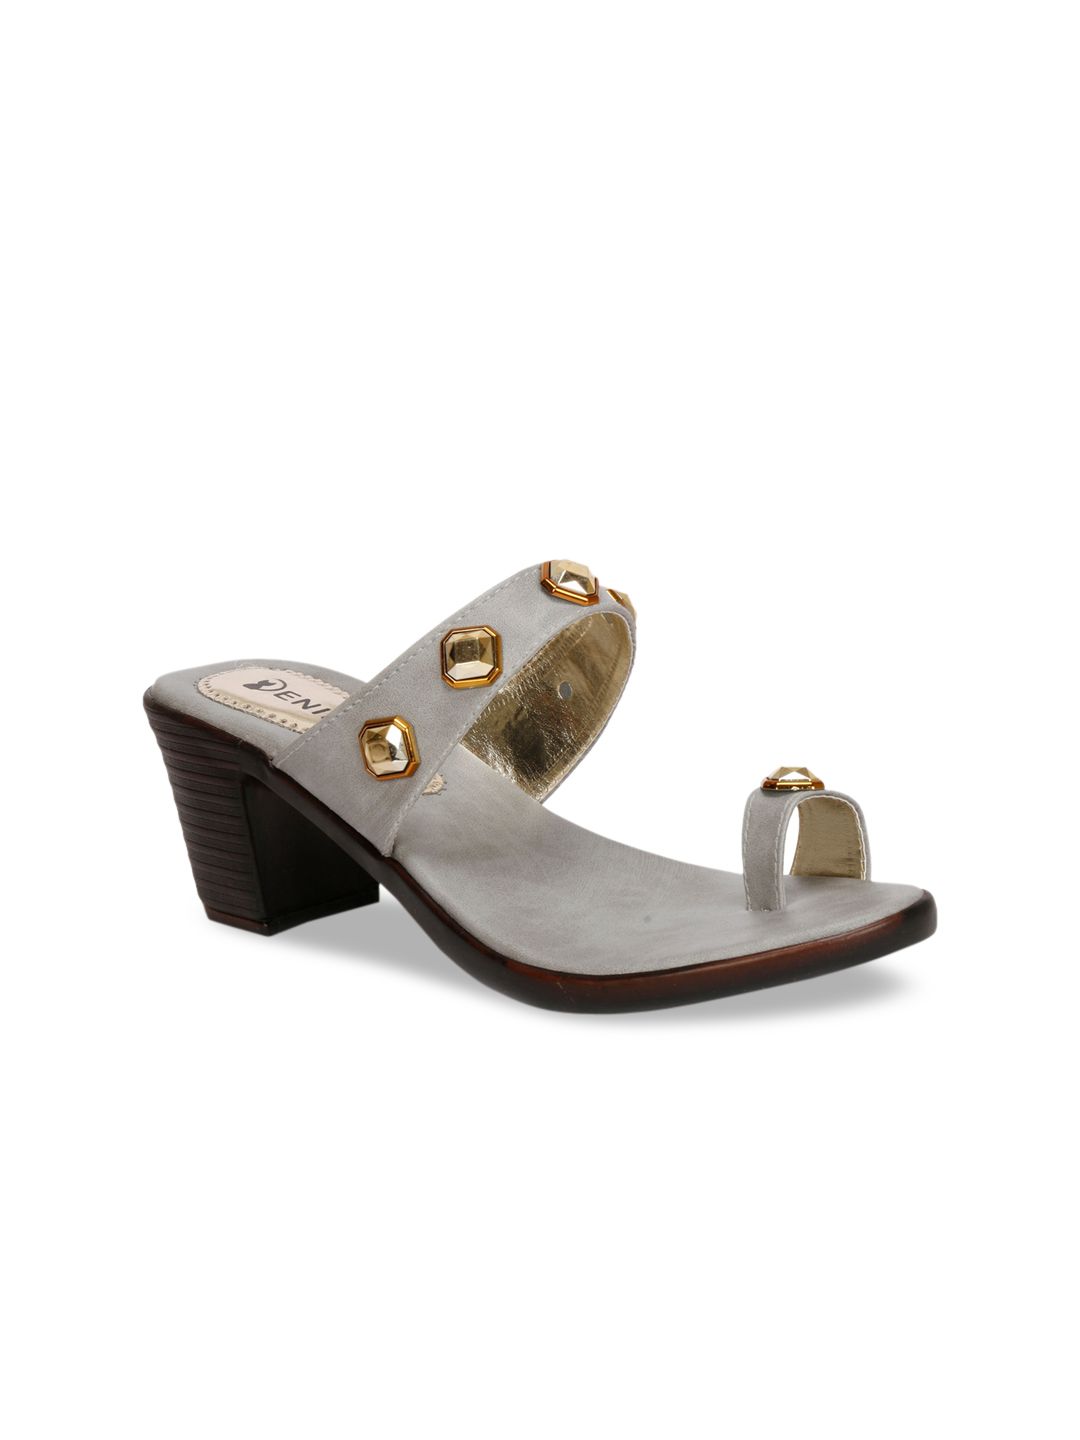 Denill Grey Embellished Block Sandals Price in India